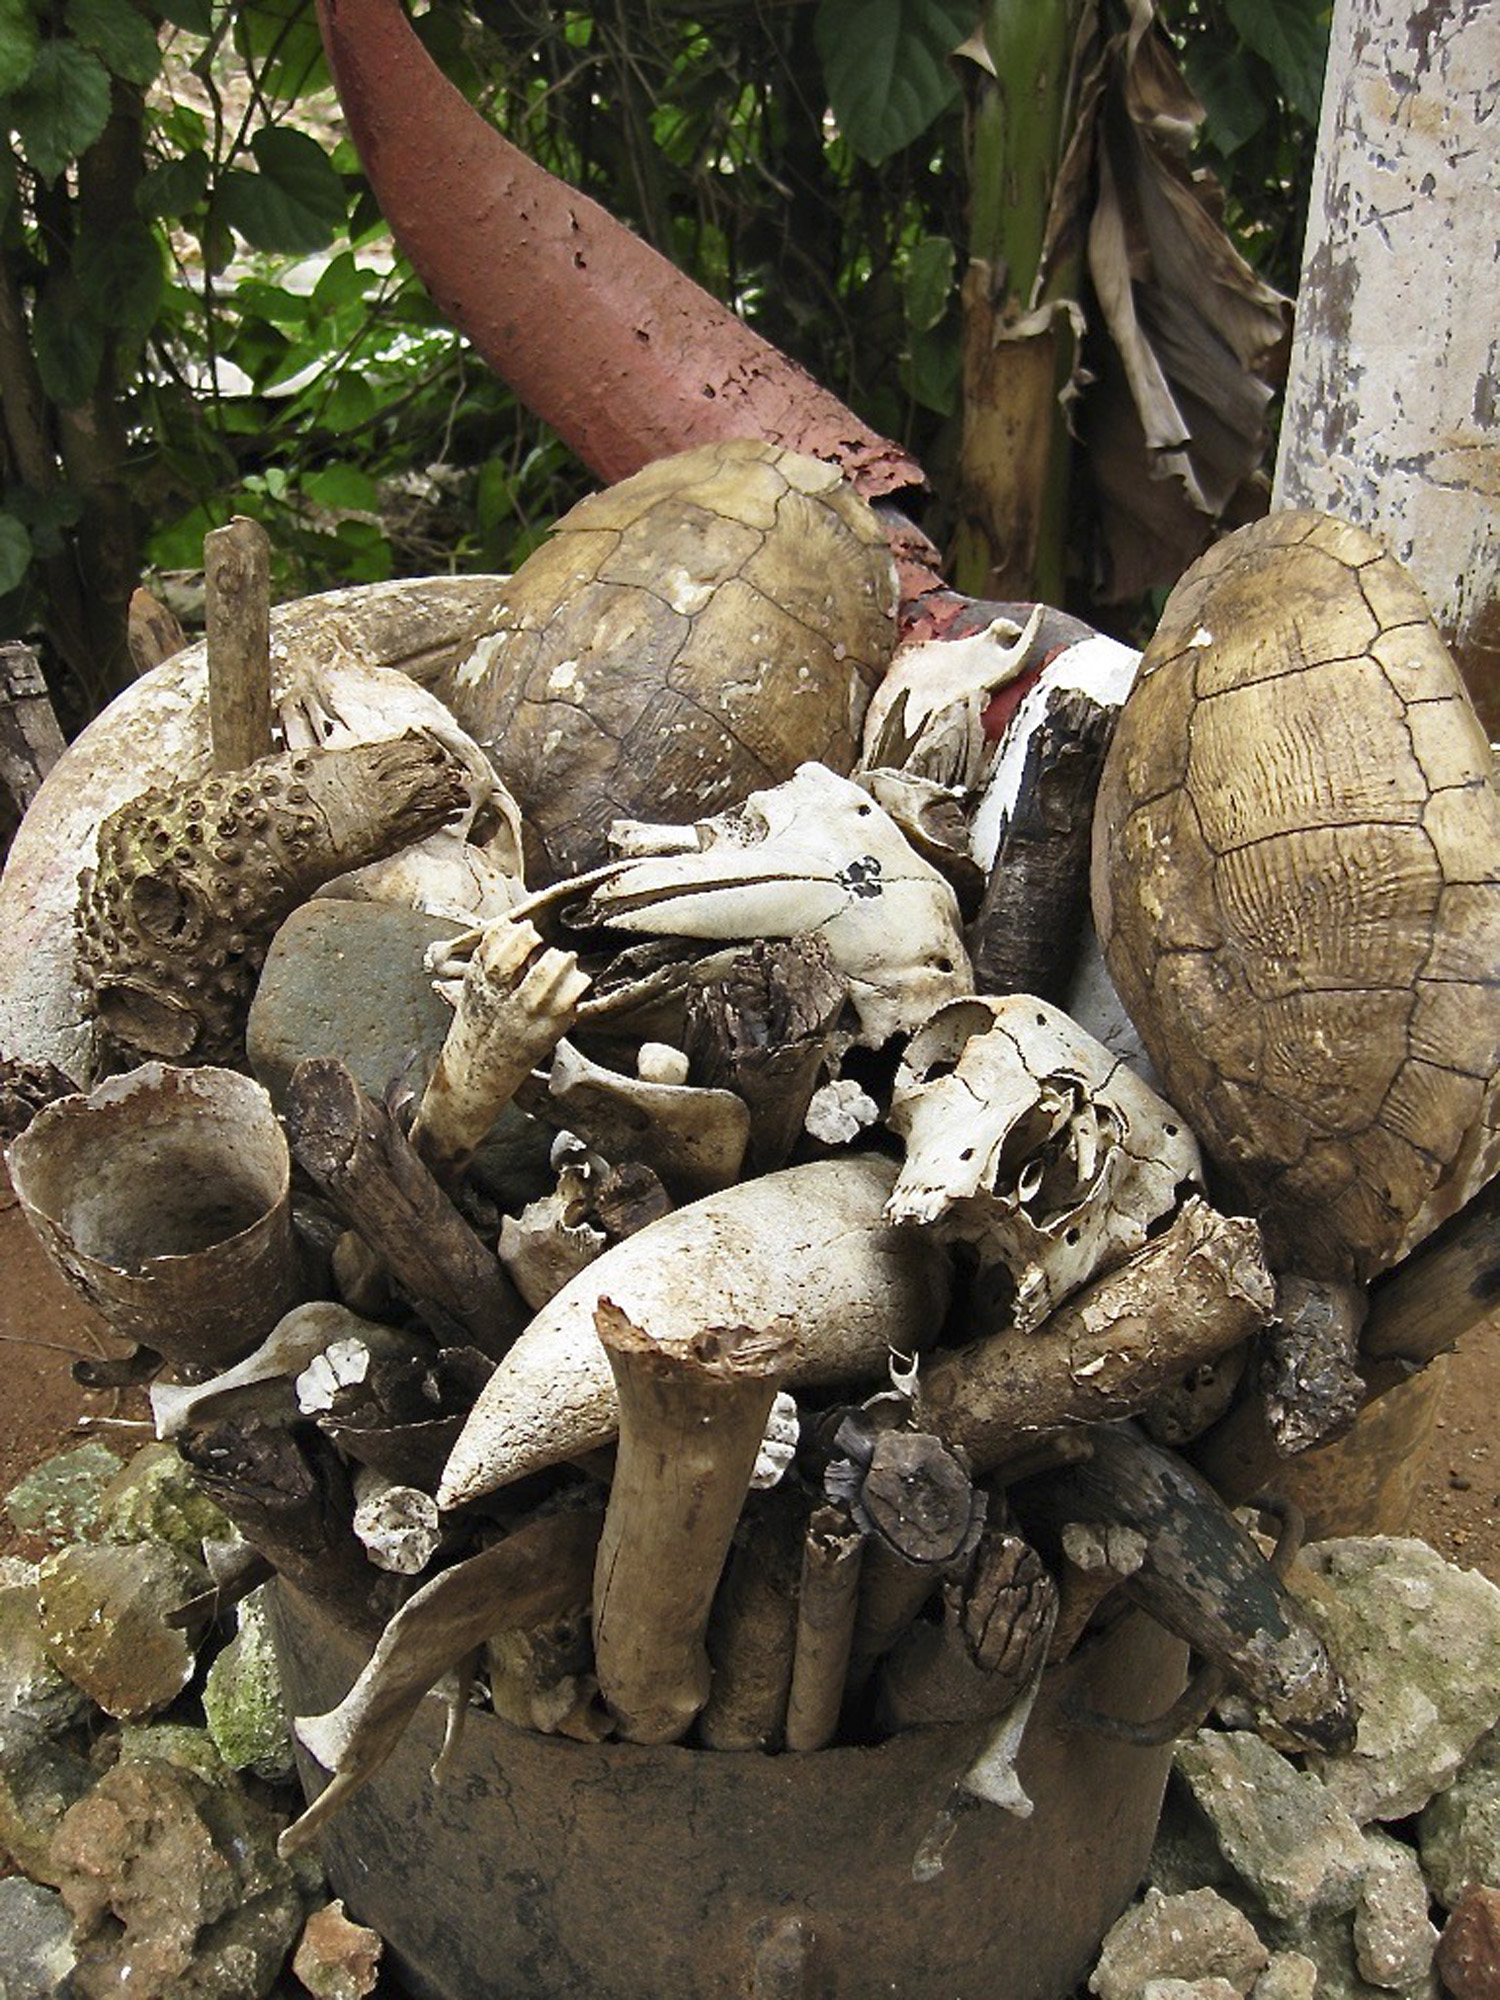 Turtle shells and bones in an alter